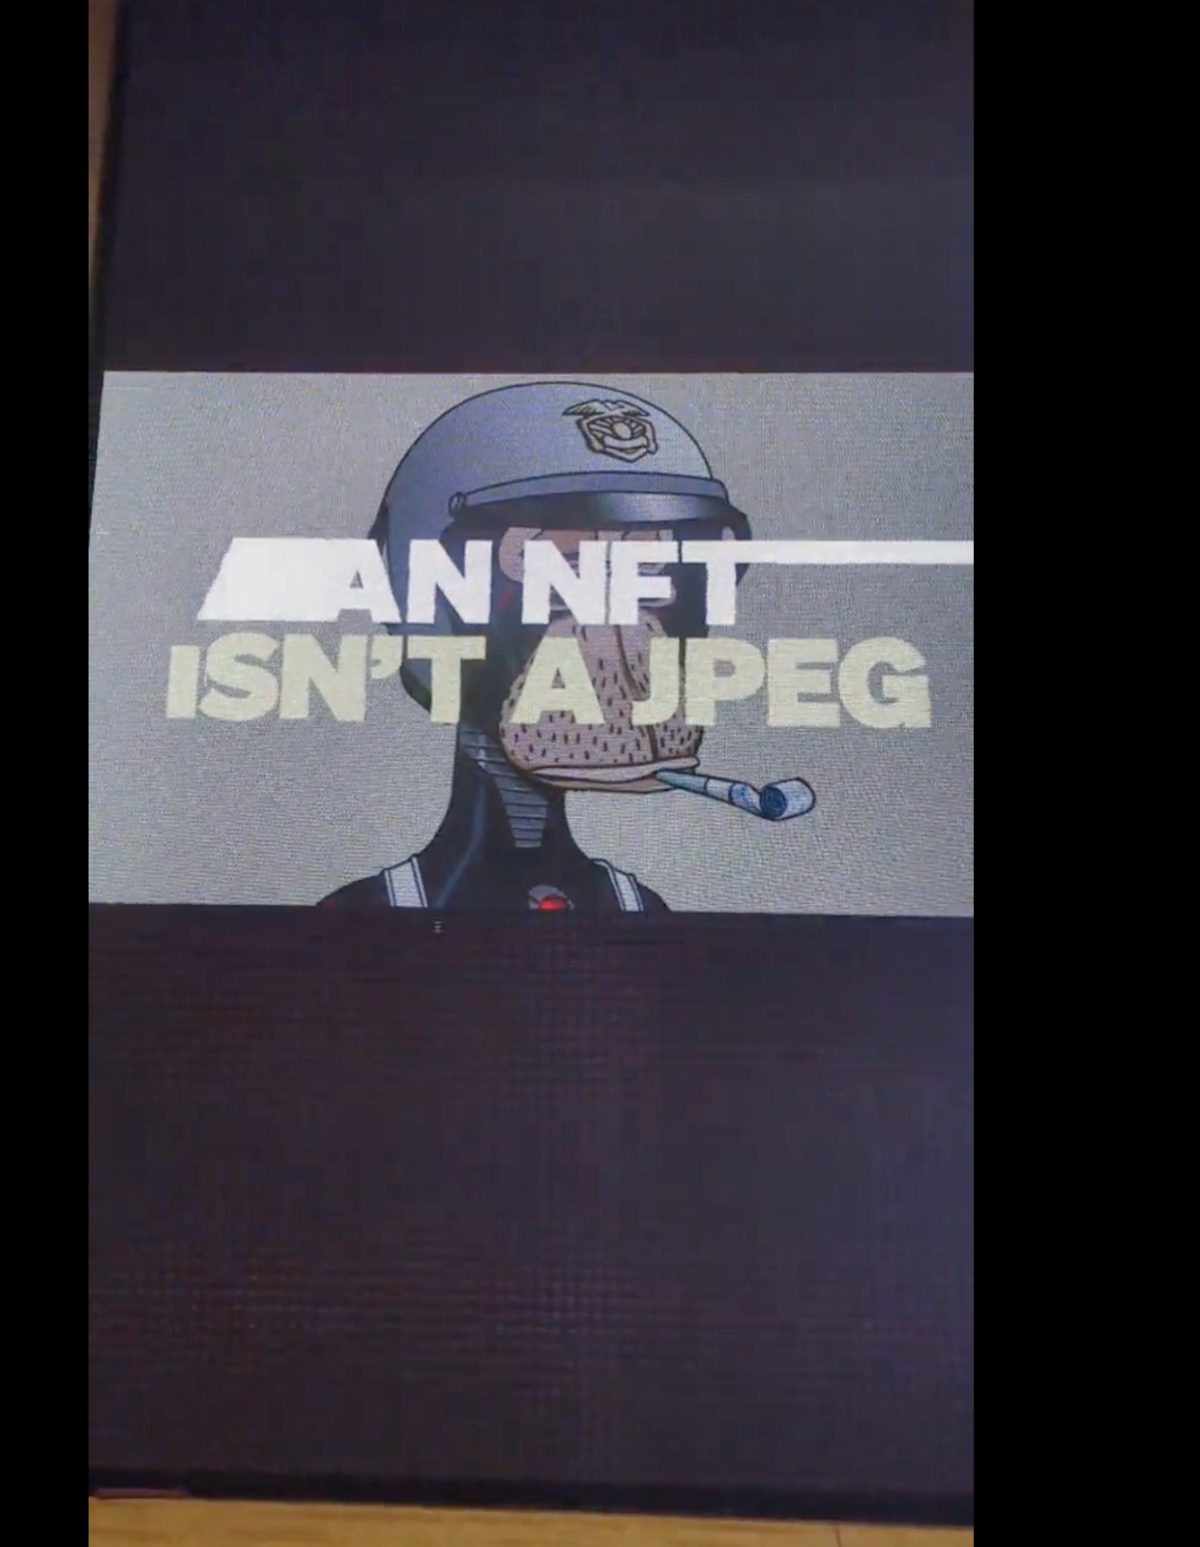 A video about NFTs. Source: Alegre’s Twitter